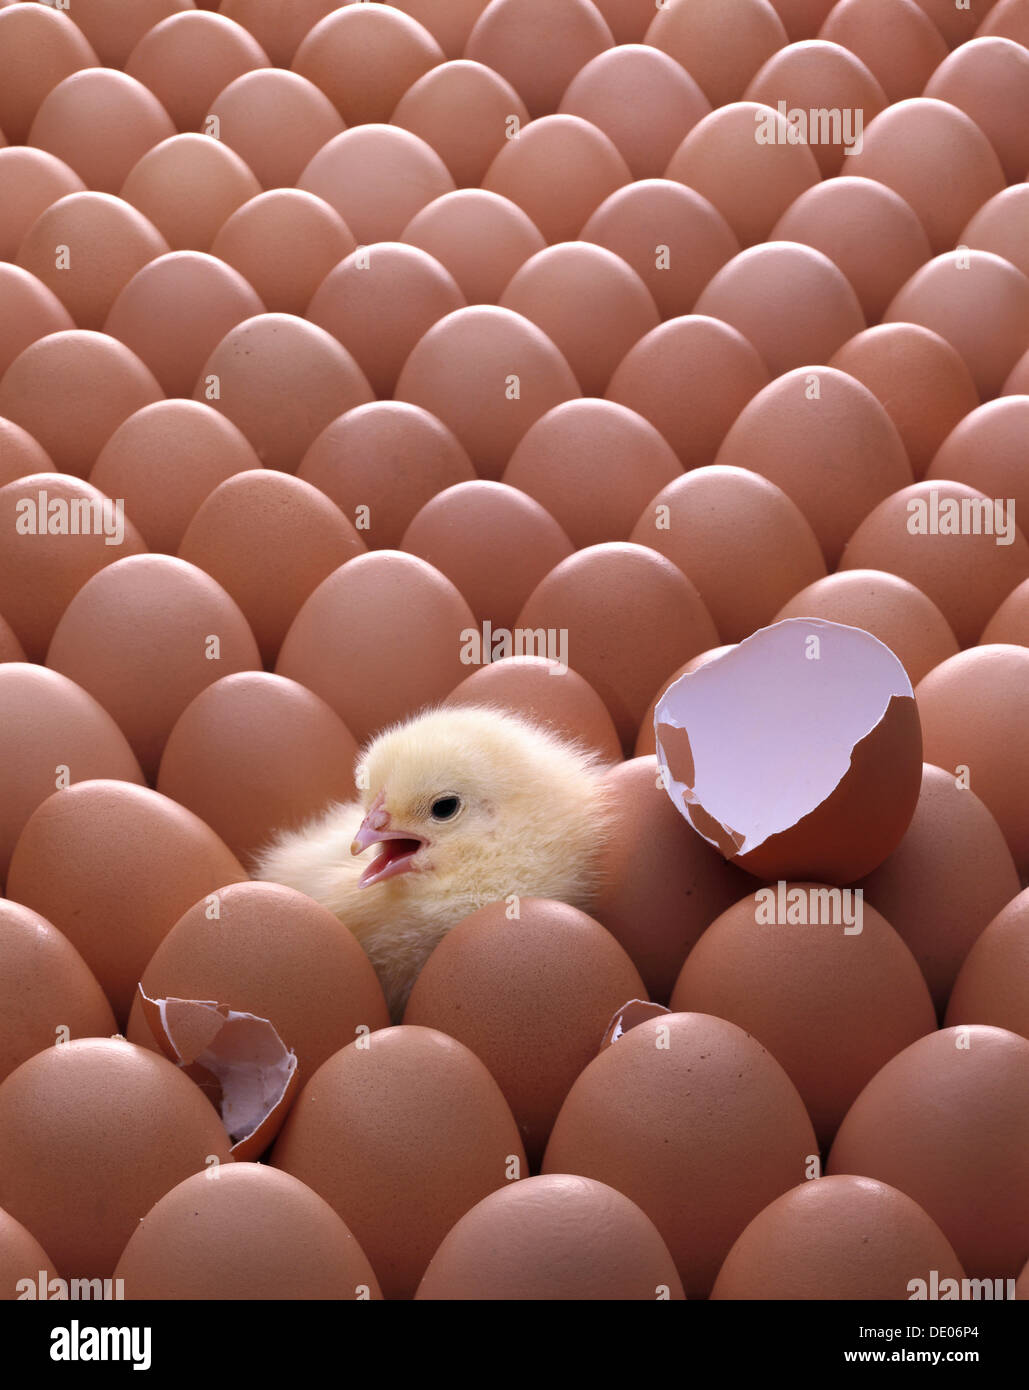 Eggs and a hatched chick Stock Photo